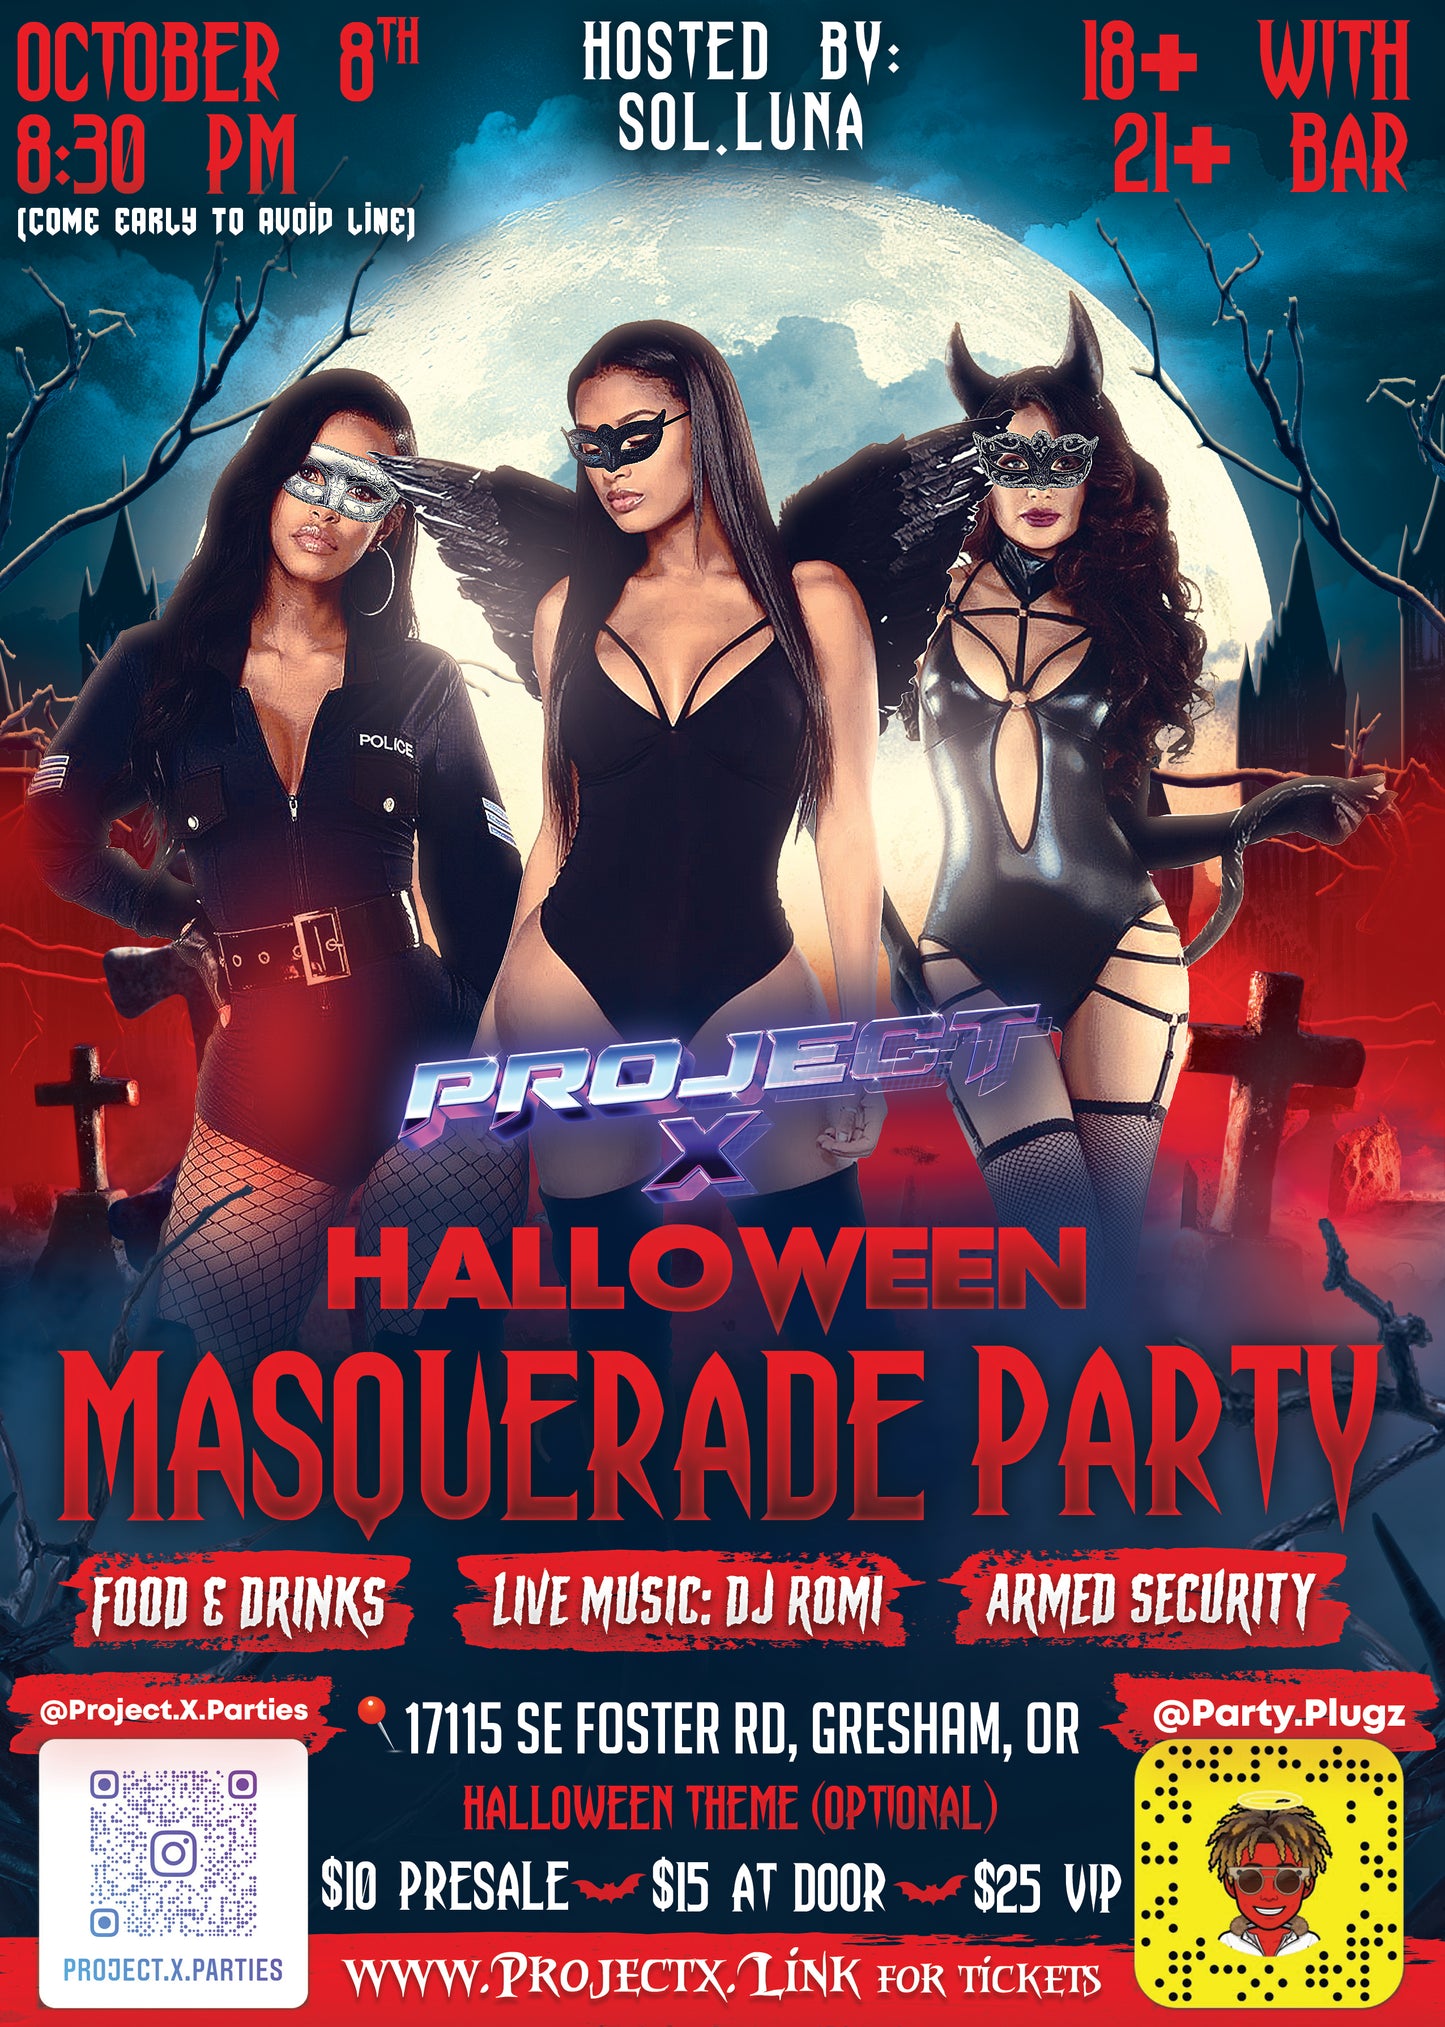 Masquerade Party General Admission